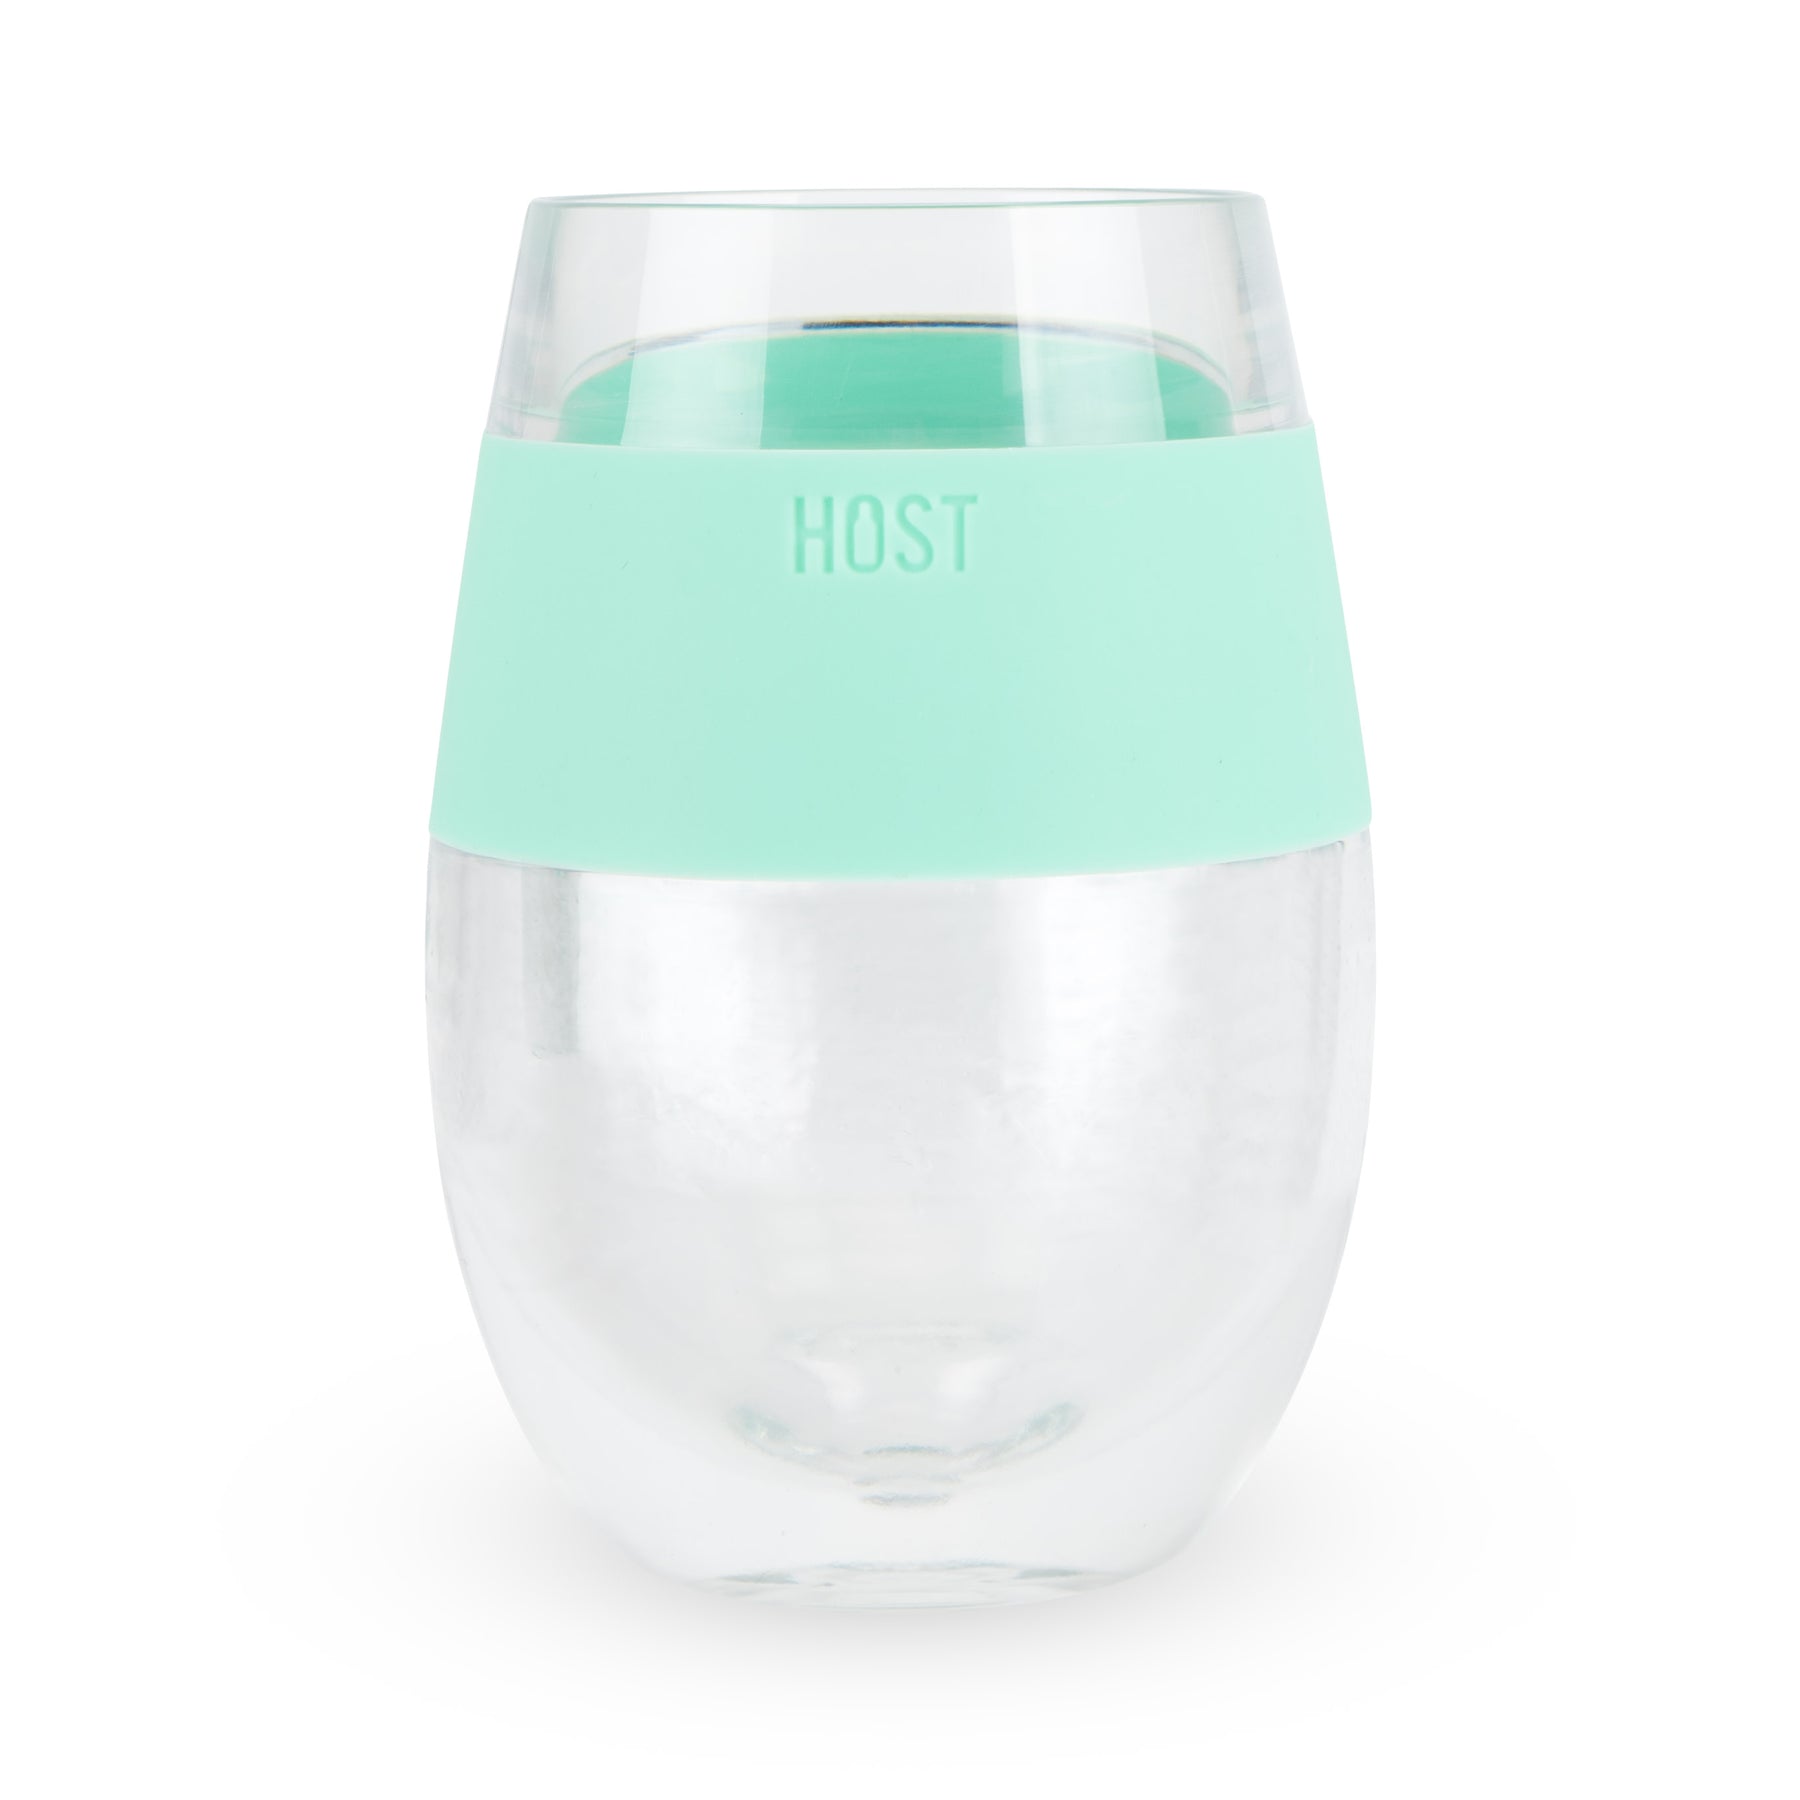 Host Wine Freeze Cup Set of 2 - Plastic Double Wall Insulated Wine Cooling  Freezable Drink Vacuum Cu…See more Host Wine Freeze Cup Set of 2 - Plastic